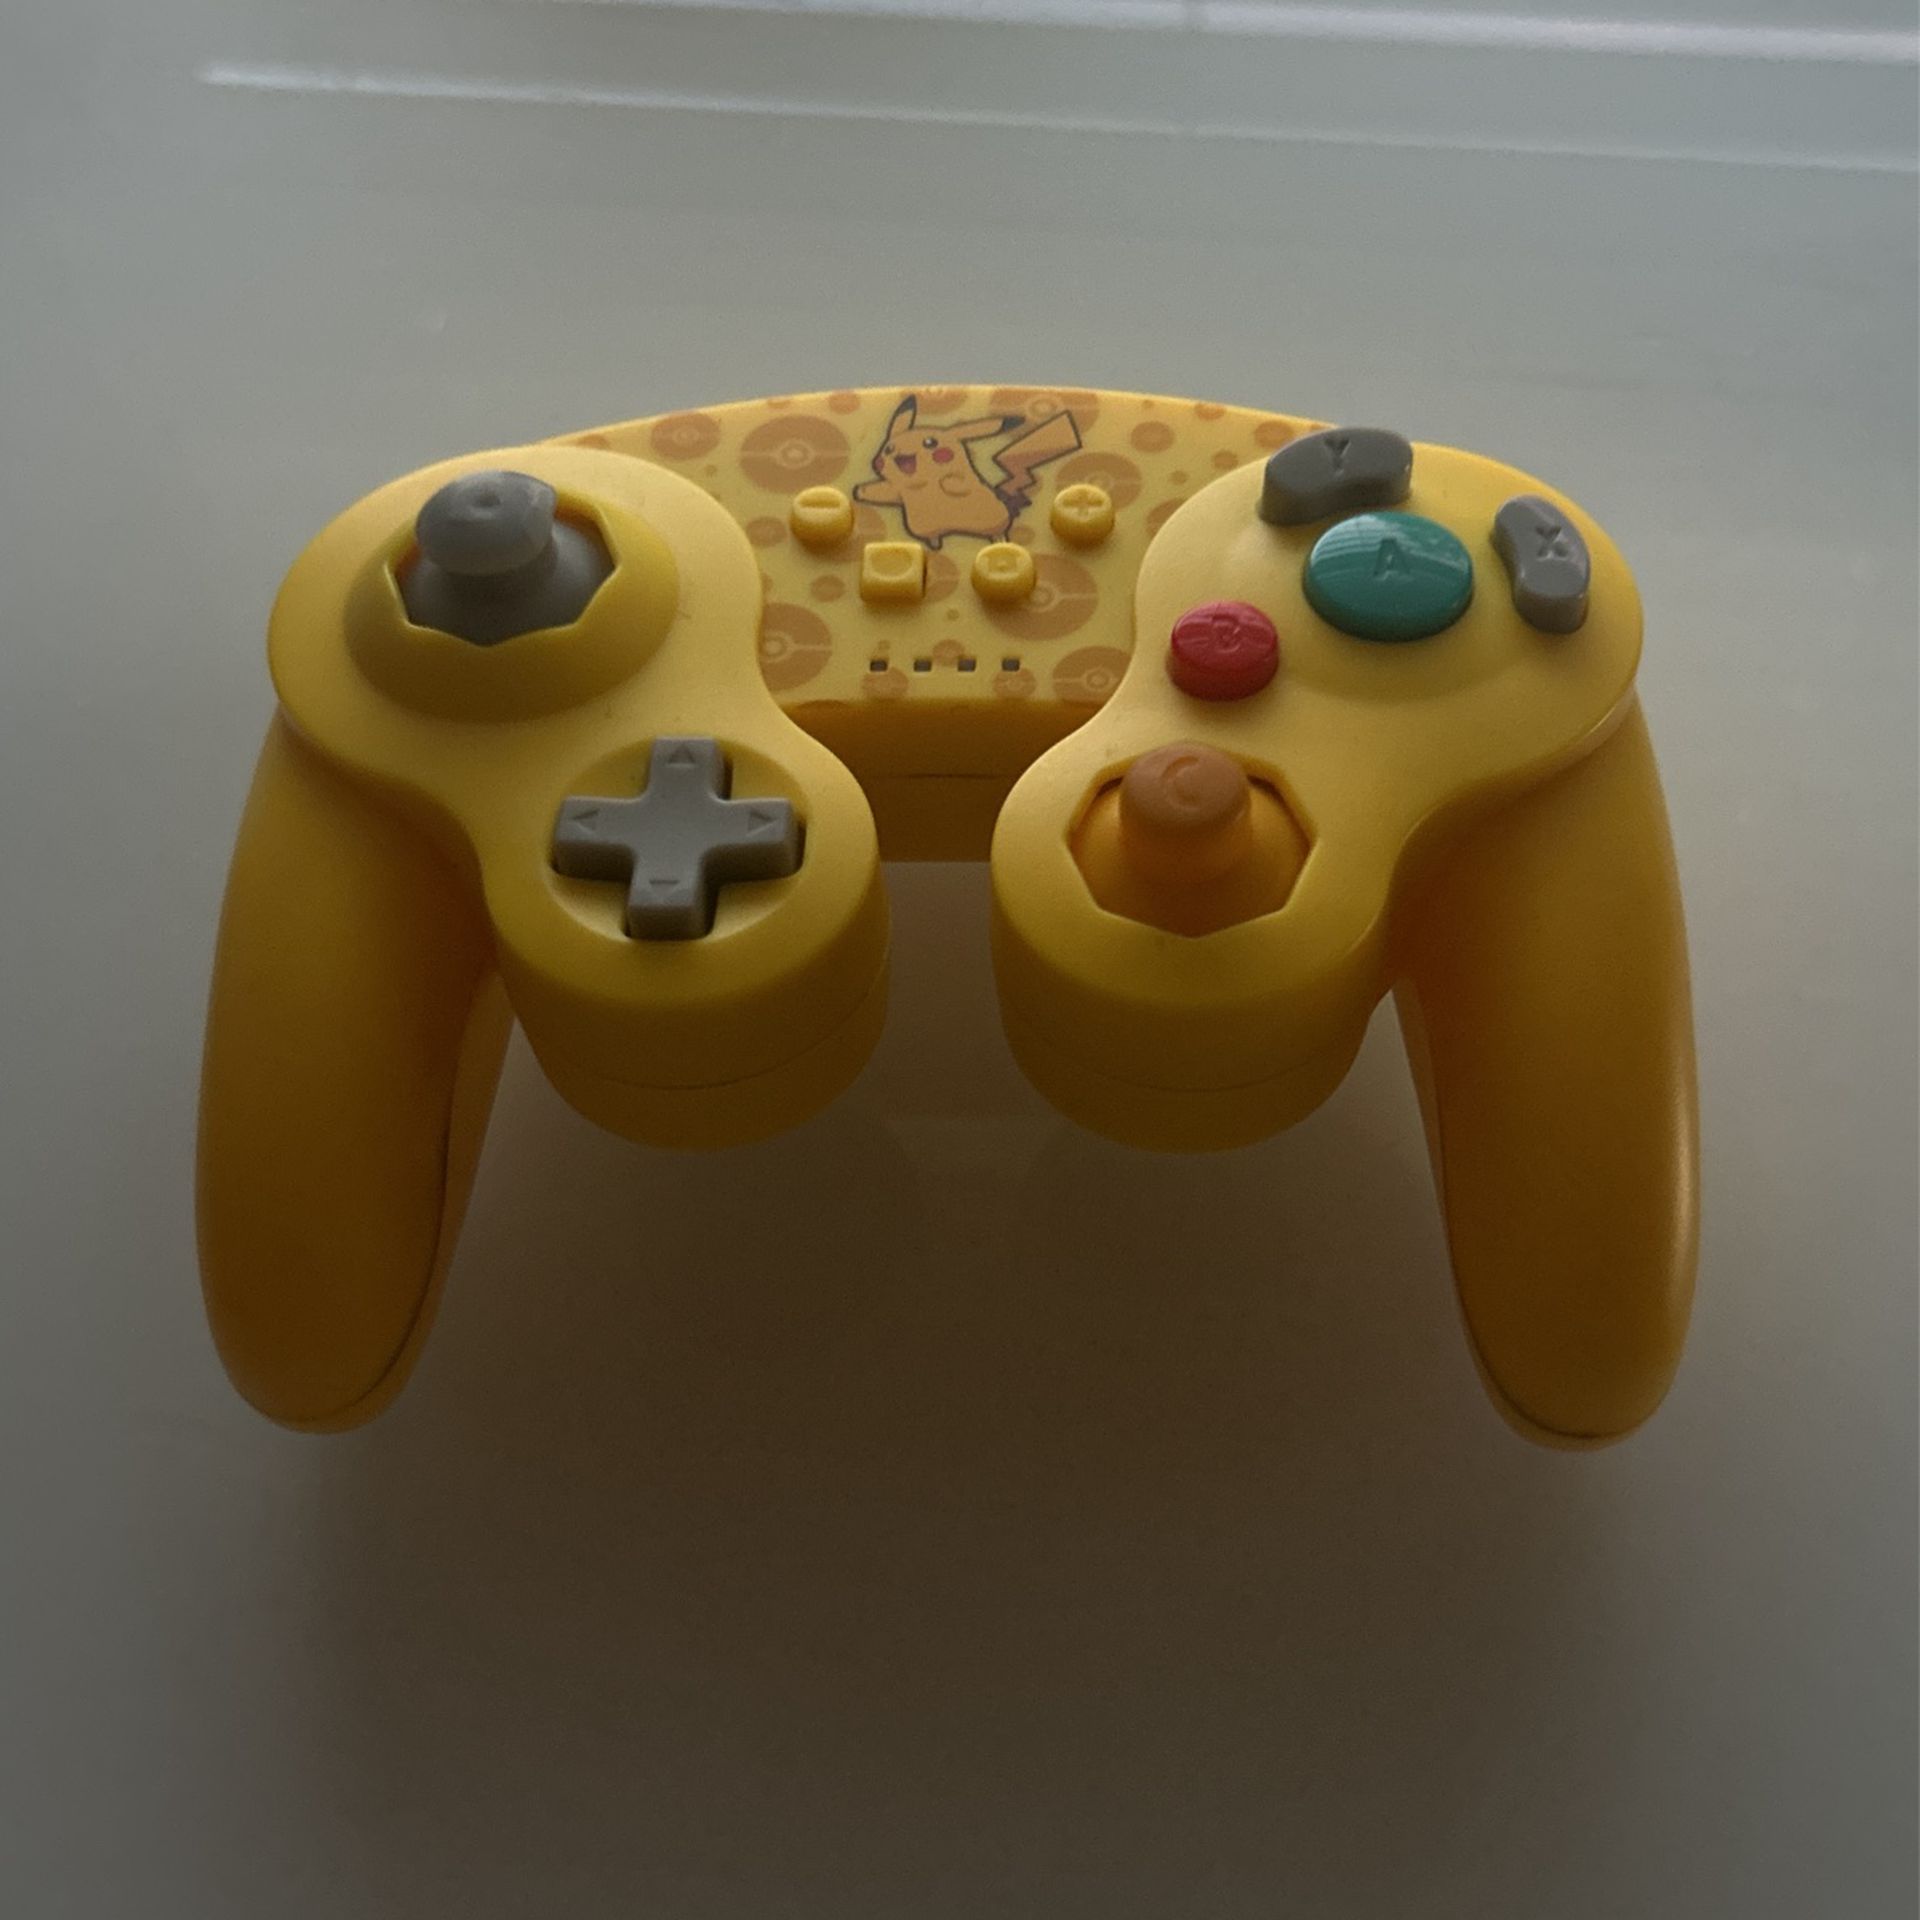 Wireless Controller For Nintendo Switch. Gamecube Style